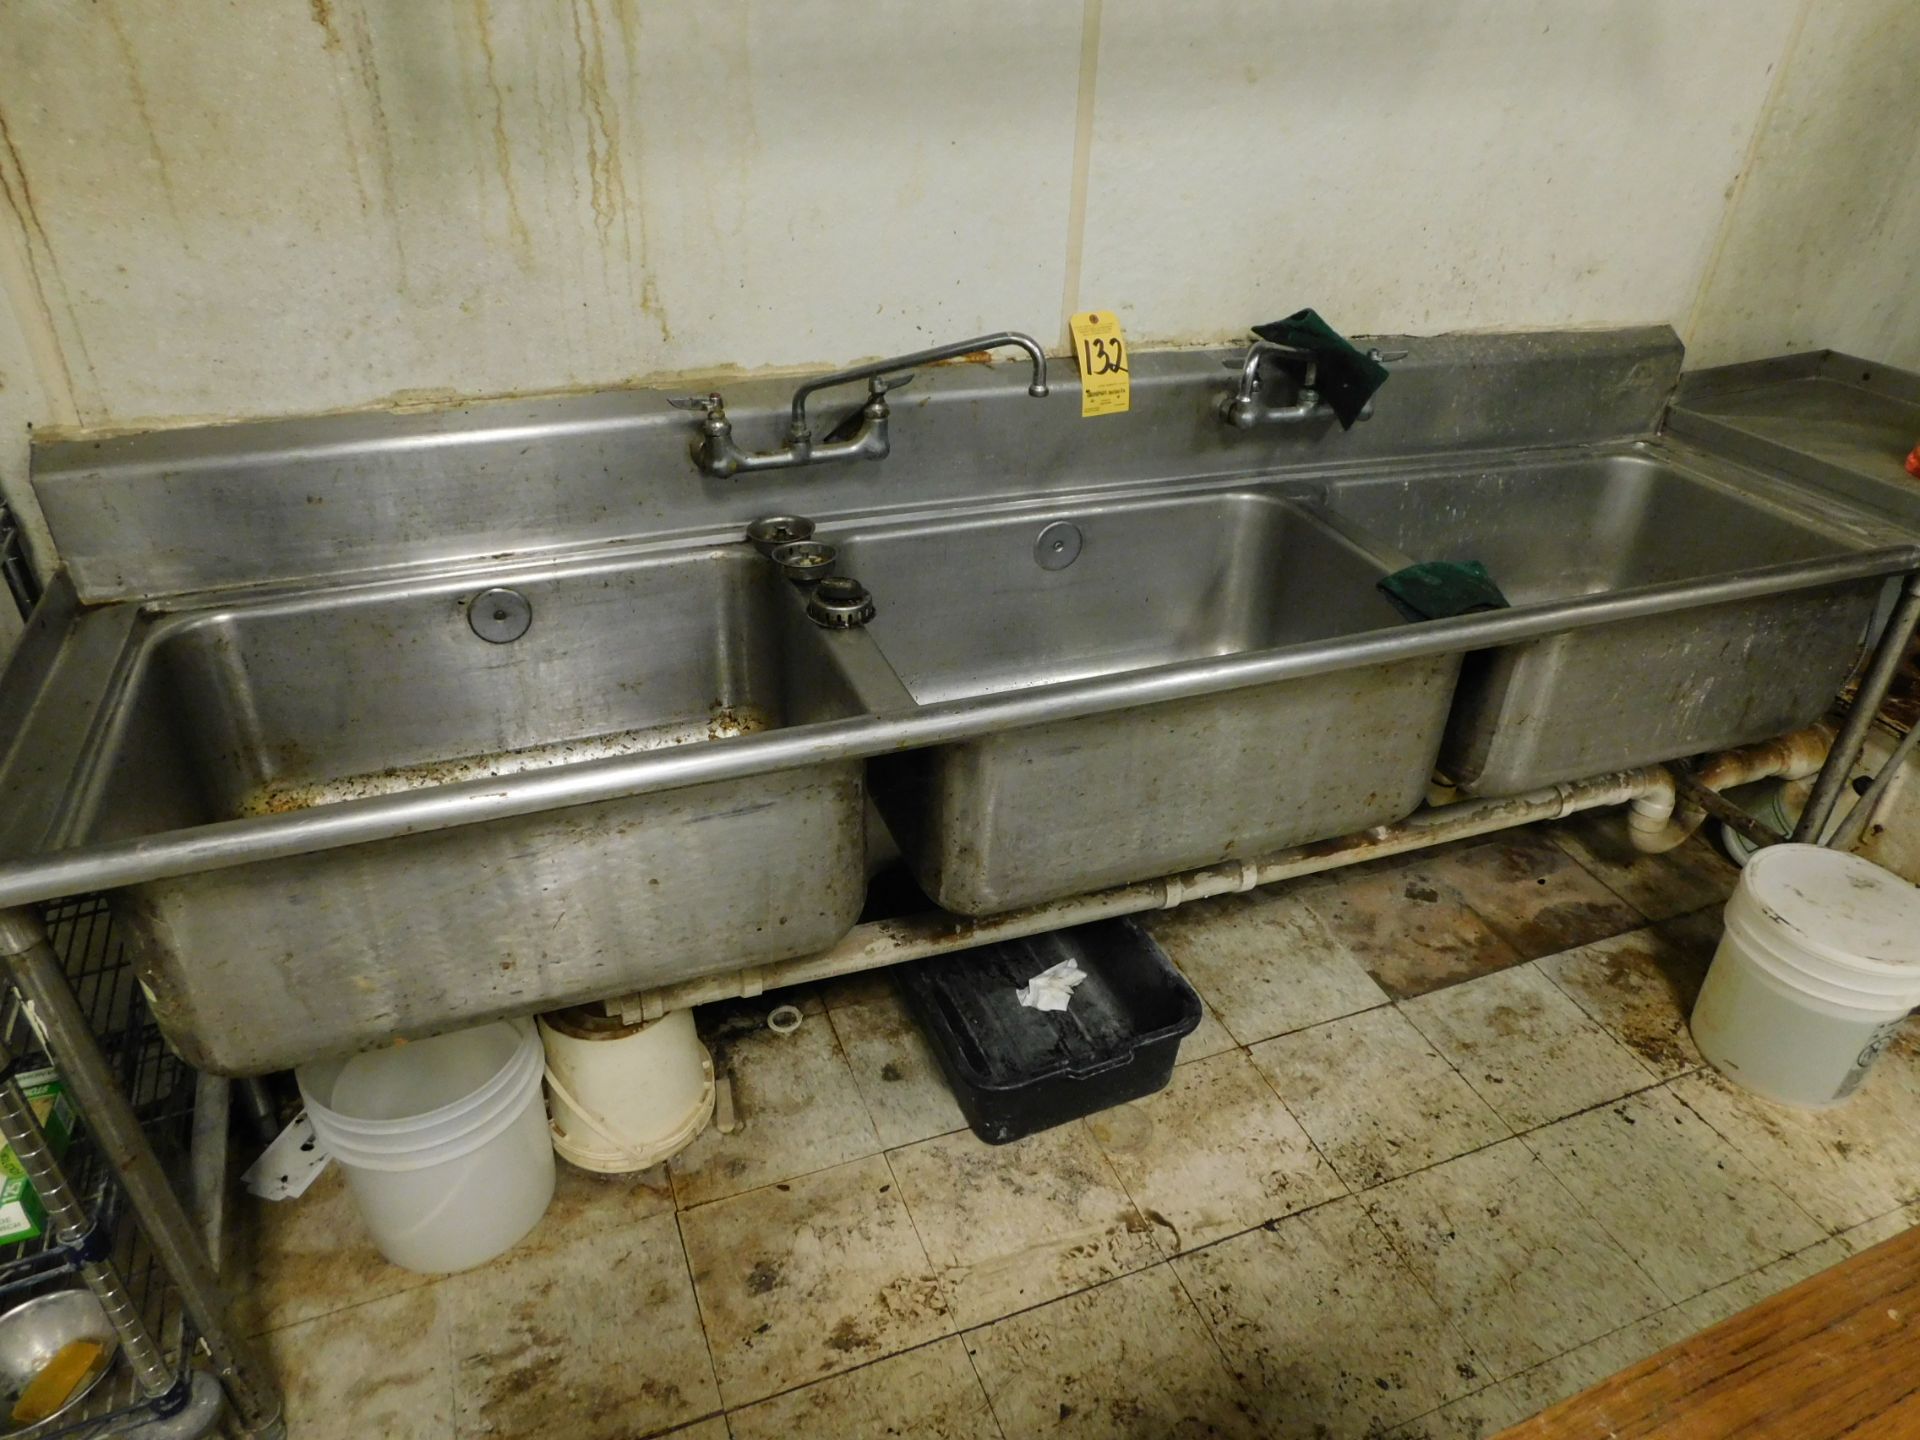 3-Bay Stainless Steel Sink with Drainboard